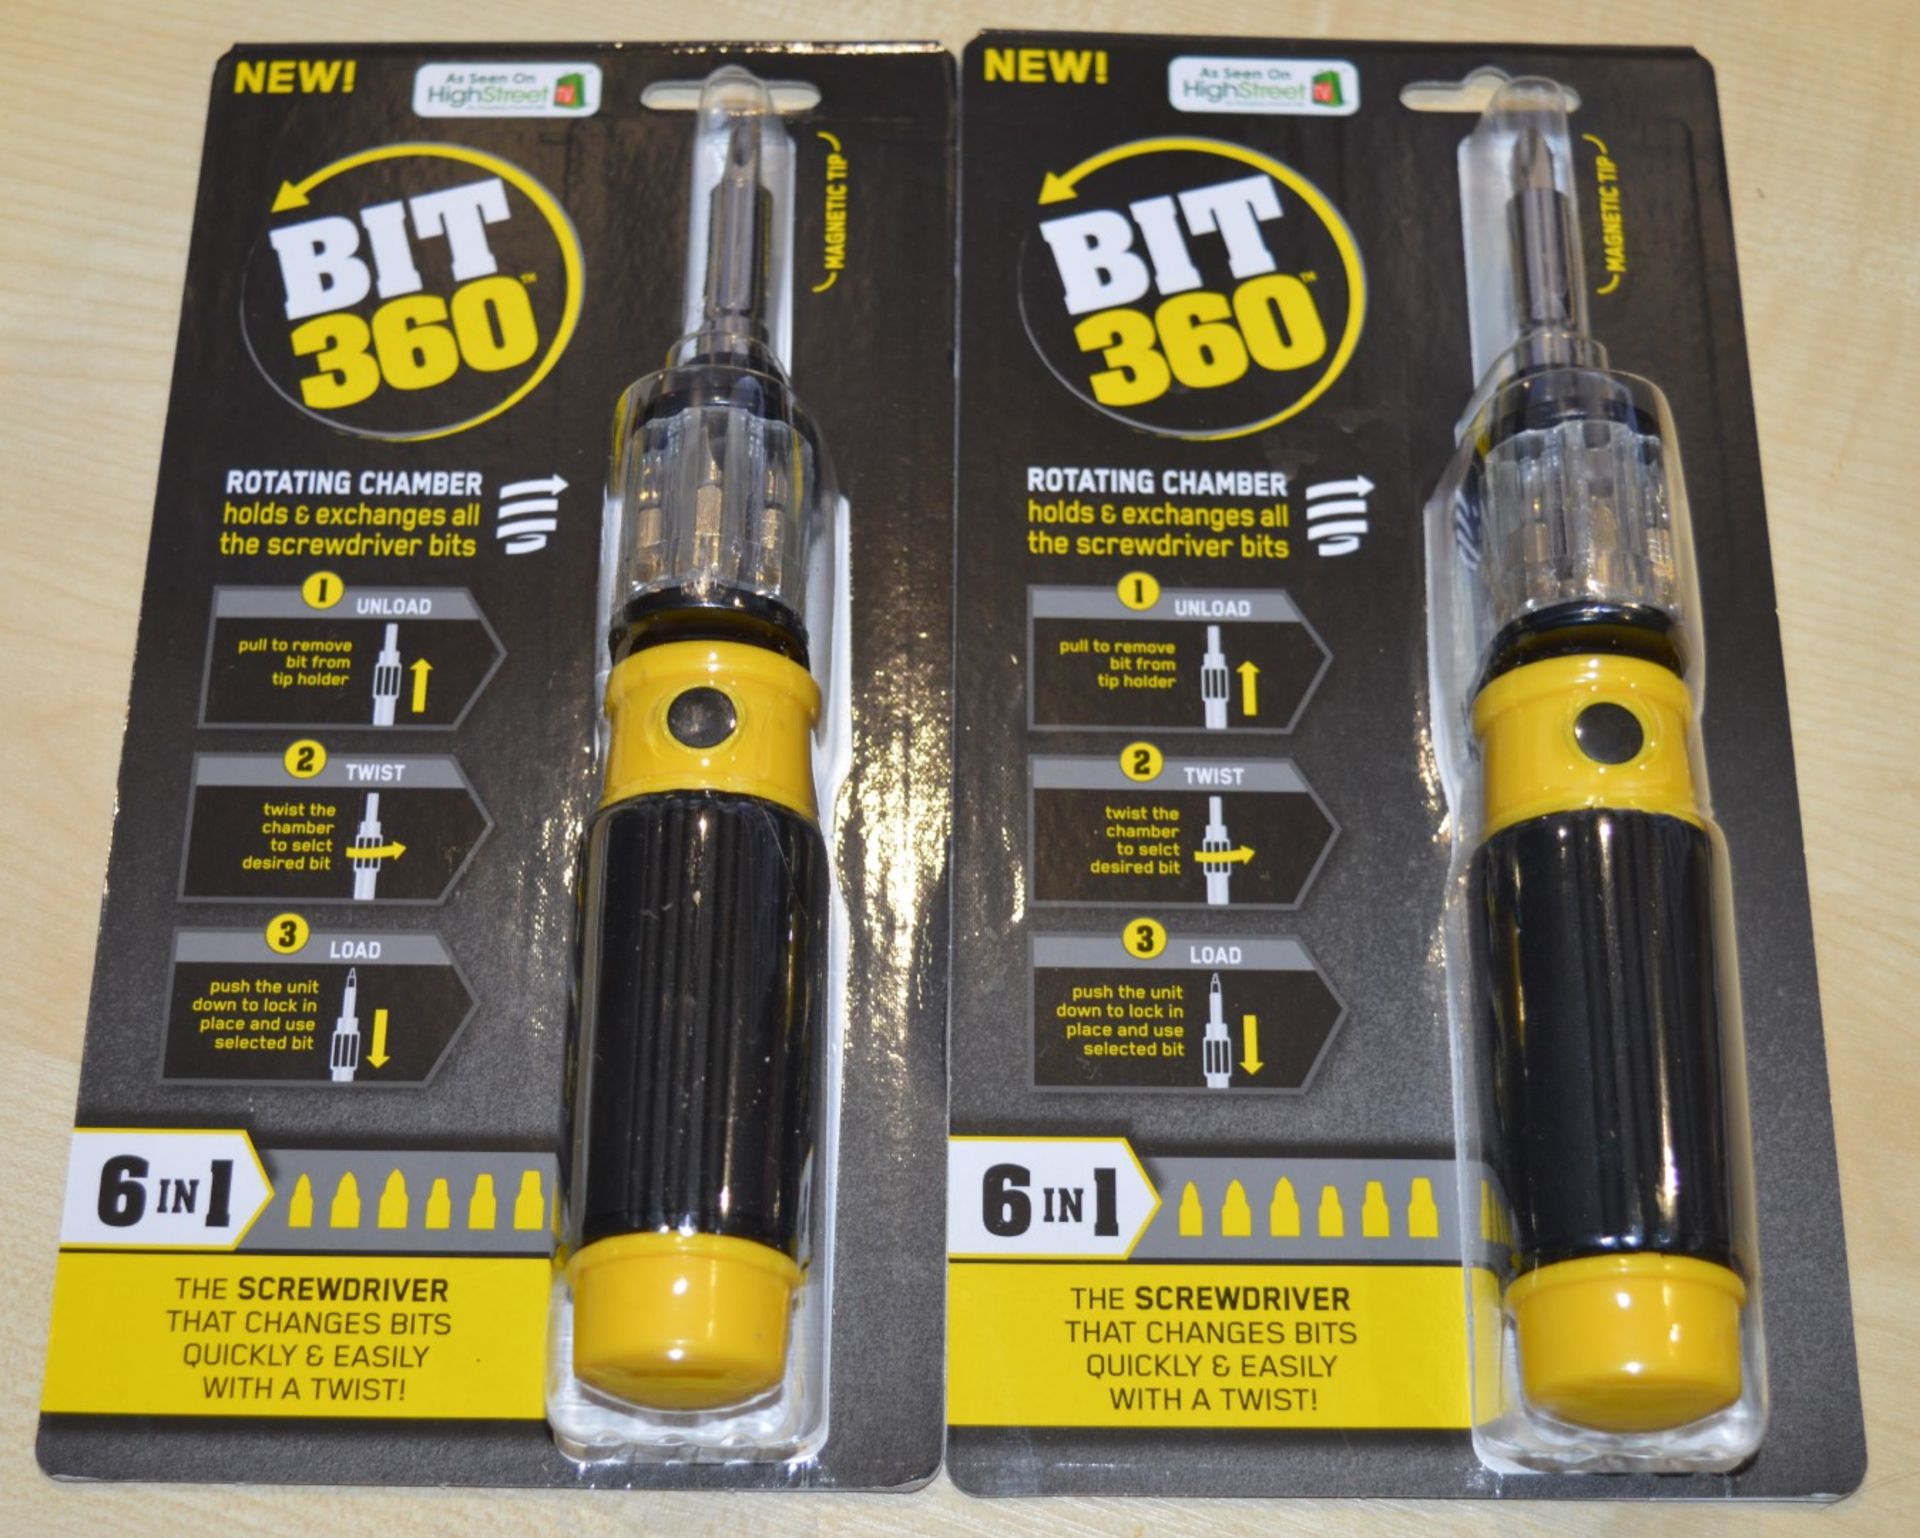 5 x Bit 360 All-in-One Screwdriver and Bit Set - The Screwdrive That Changes Bits Quickly and Easily - Image 6 of 7